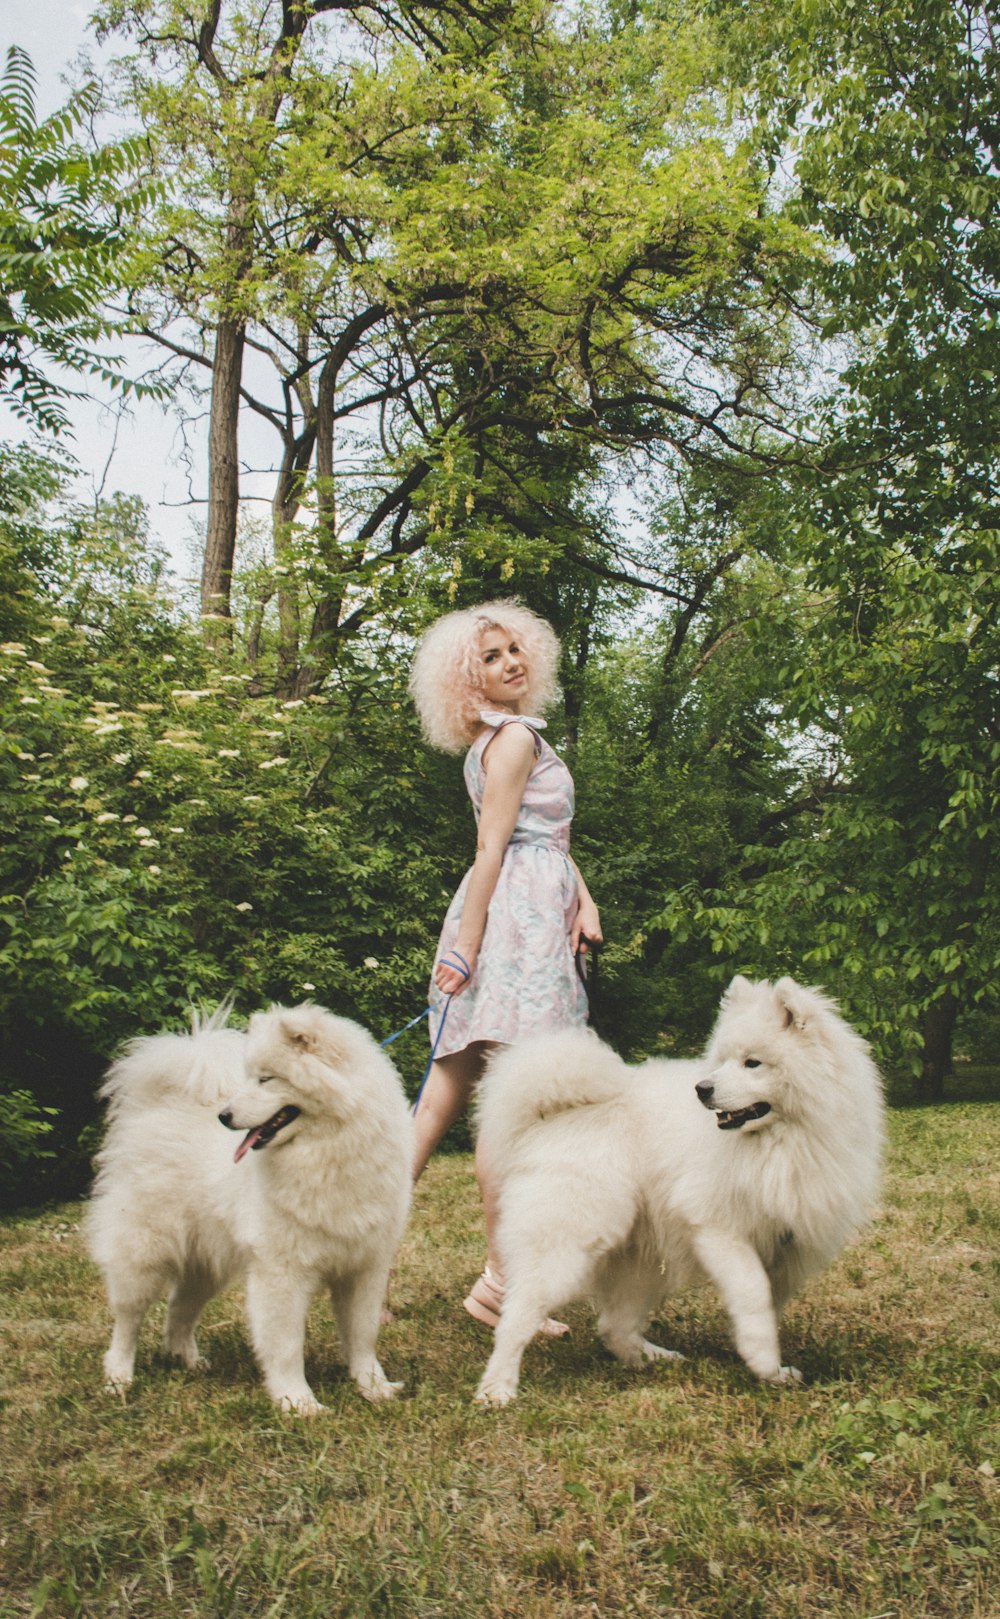 a woman standing next to three white dogs